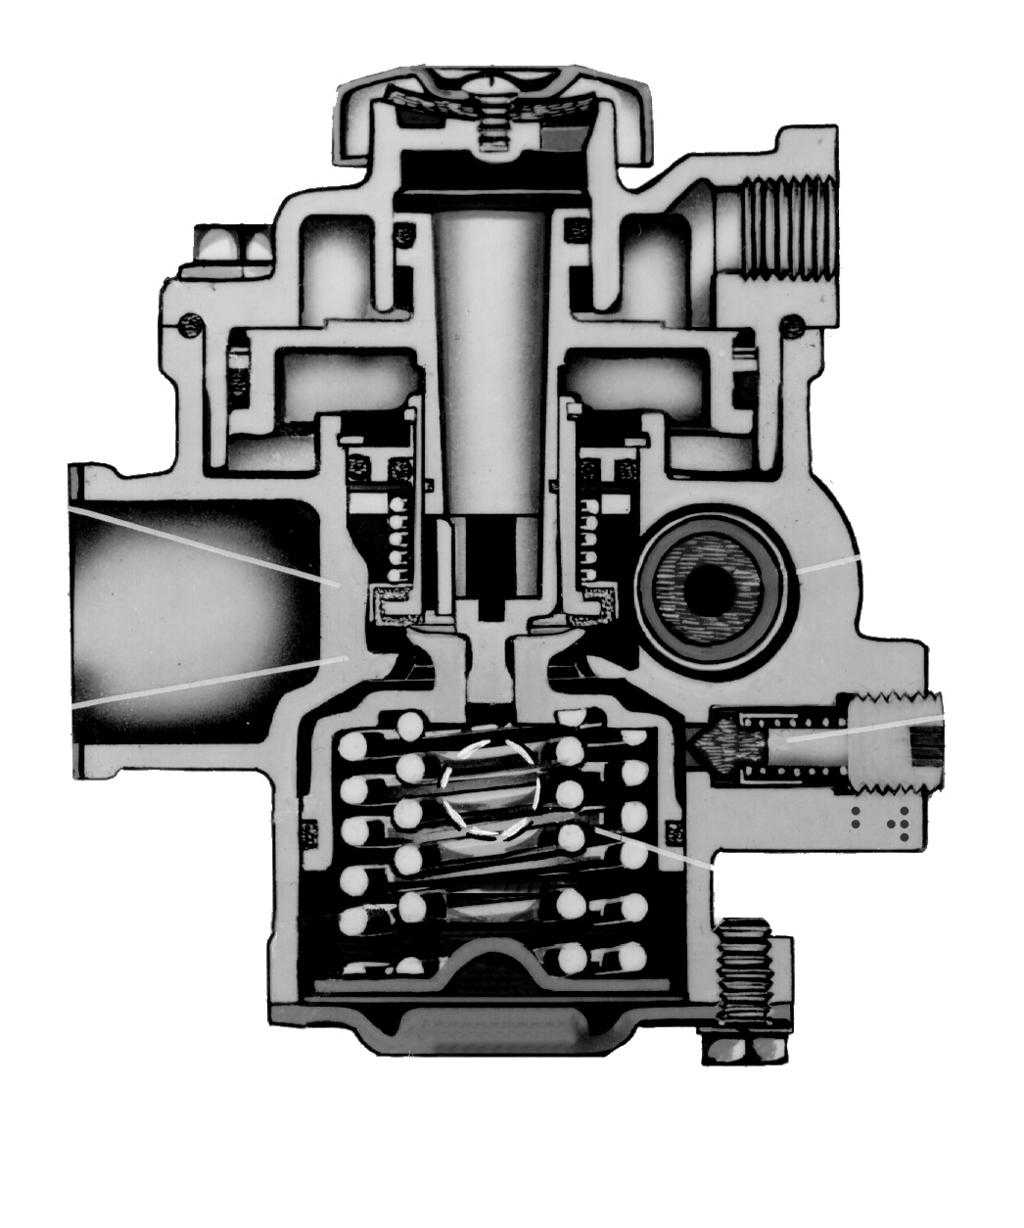 VIEW. INSET FIGURE 2 - INVERTED VIEW DESCRIPTION The Bendix R 7 modulating valve is used in conjunction with a dual air brake system and spring brake actuators.